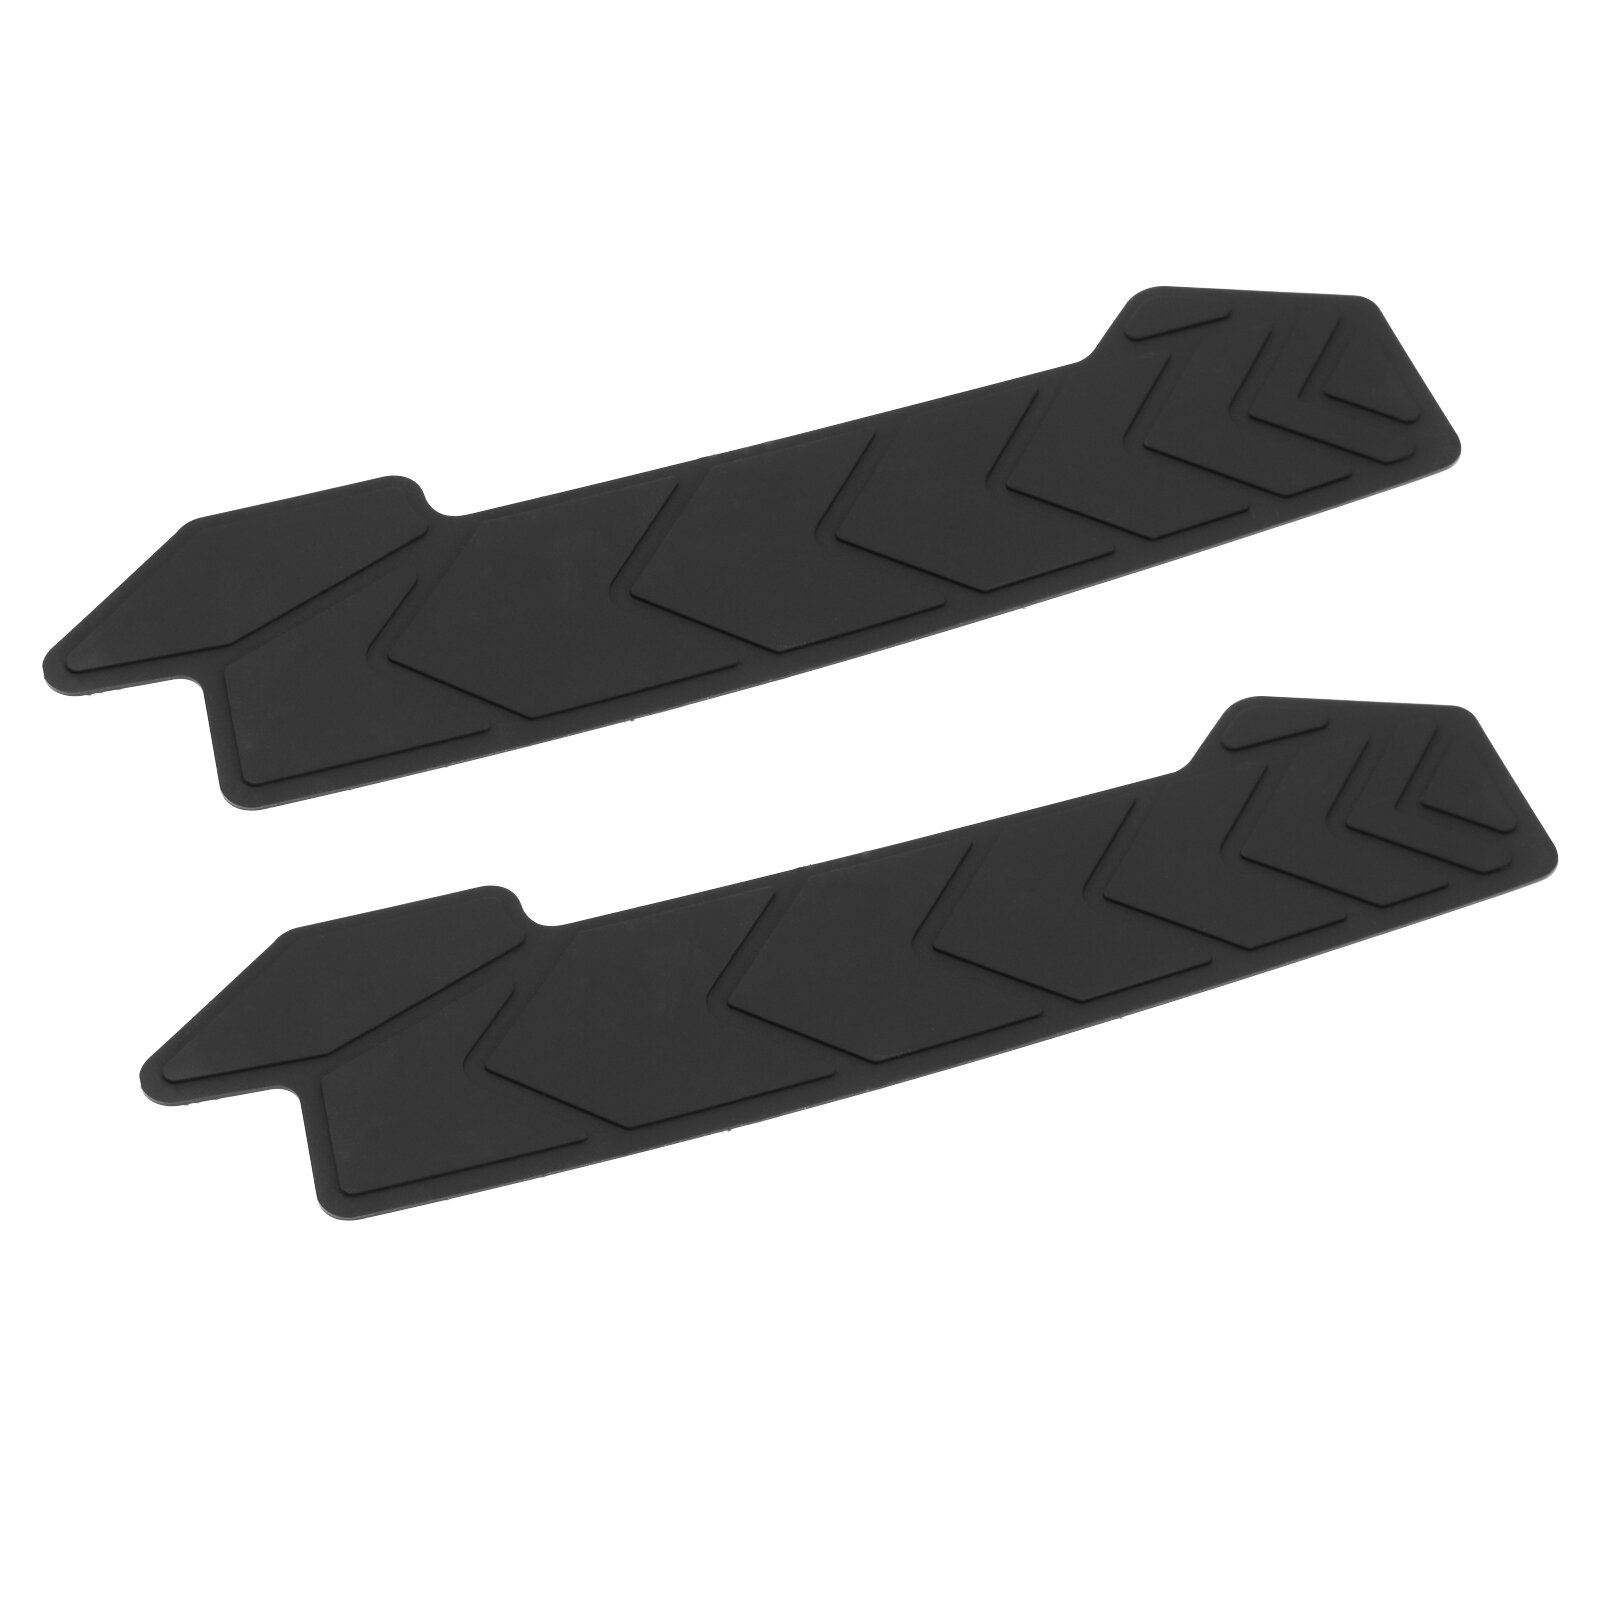 2PCS Bicycle Frame Protector Bike Chain Stay Guard Silicone Cycling Frame Pad